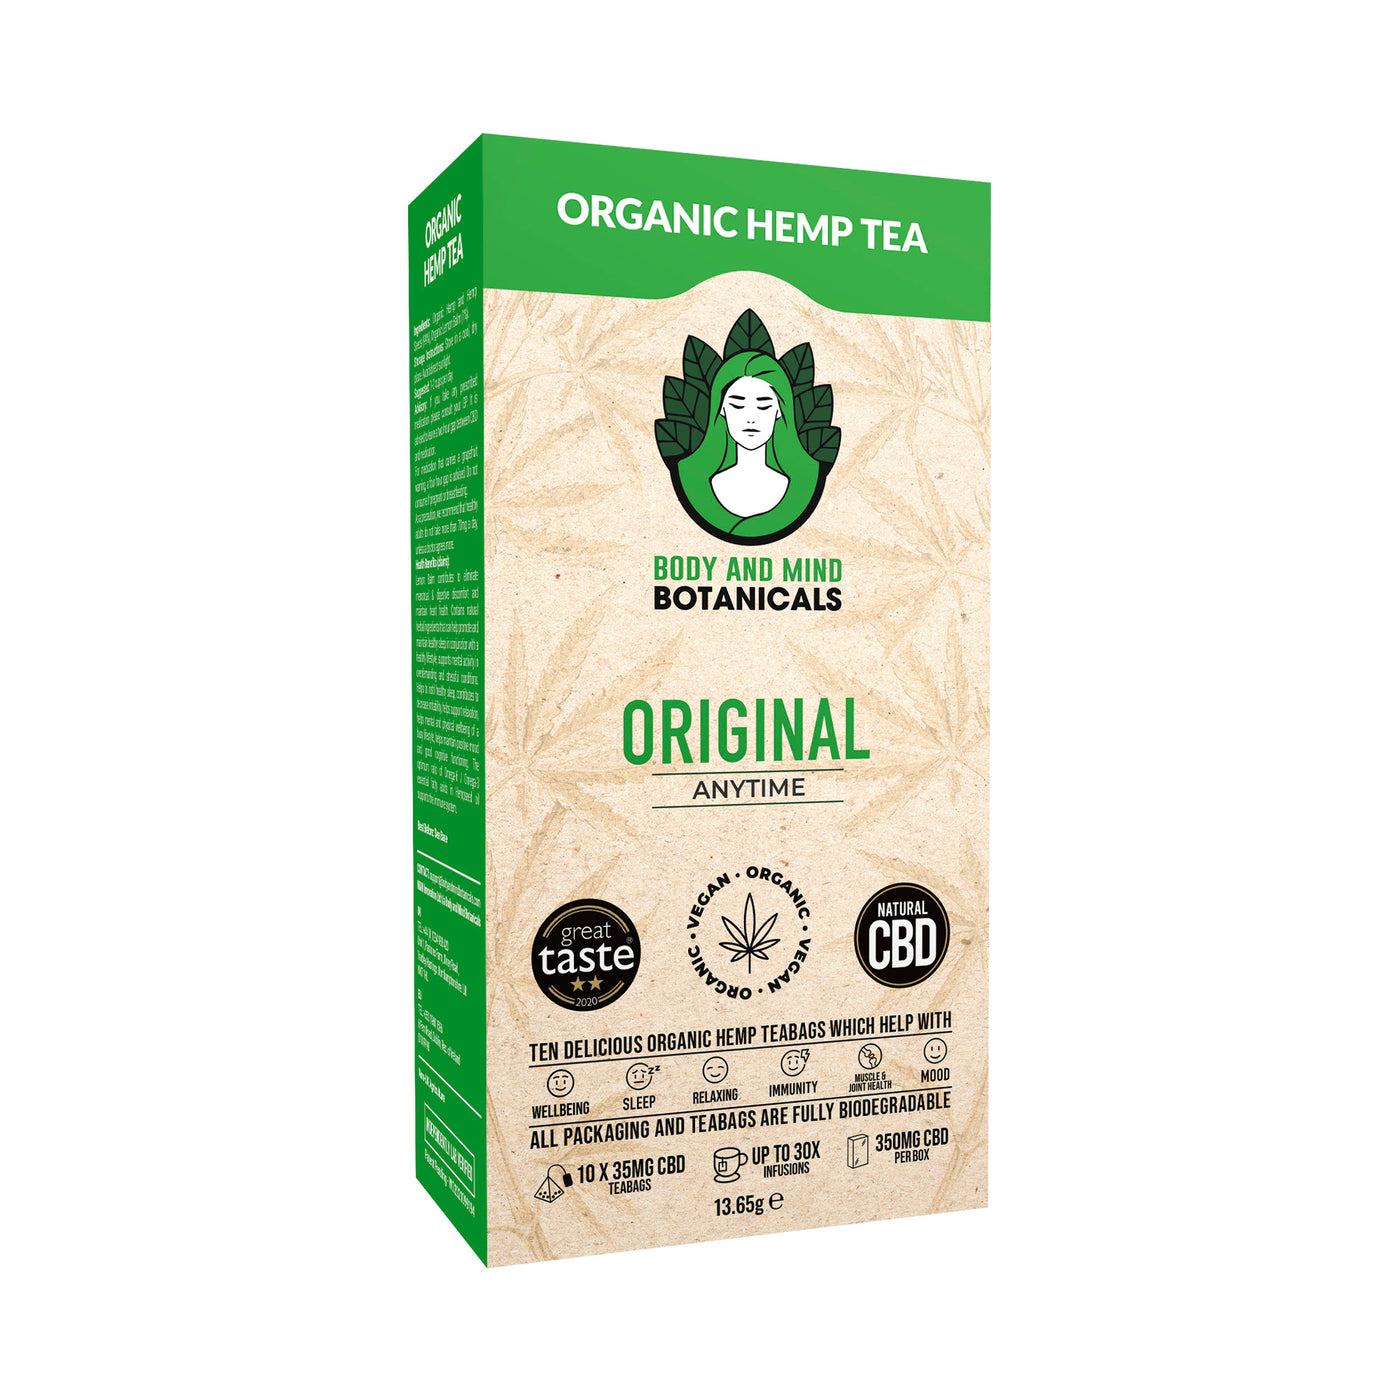 Organic Herbal Tea for the Body & Mind